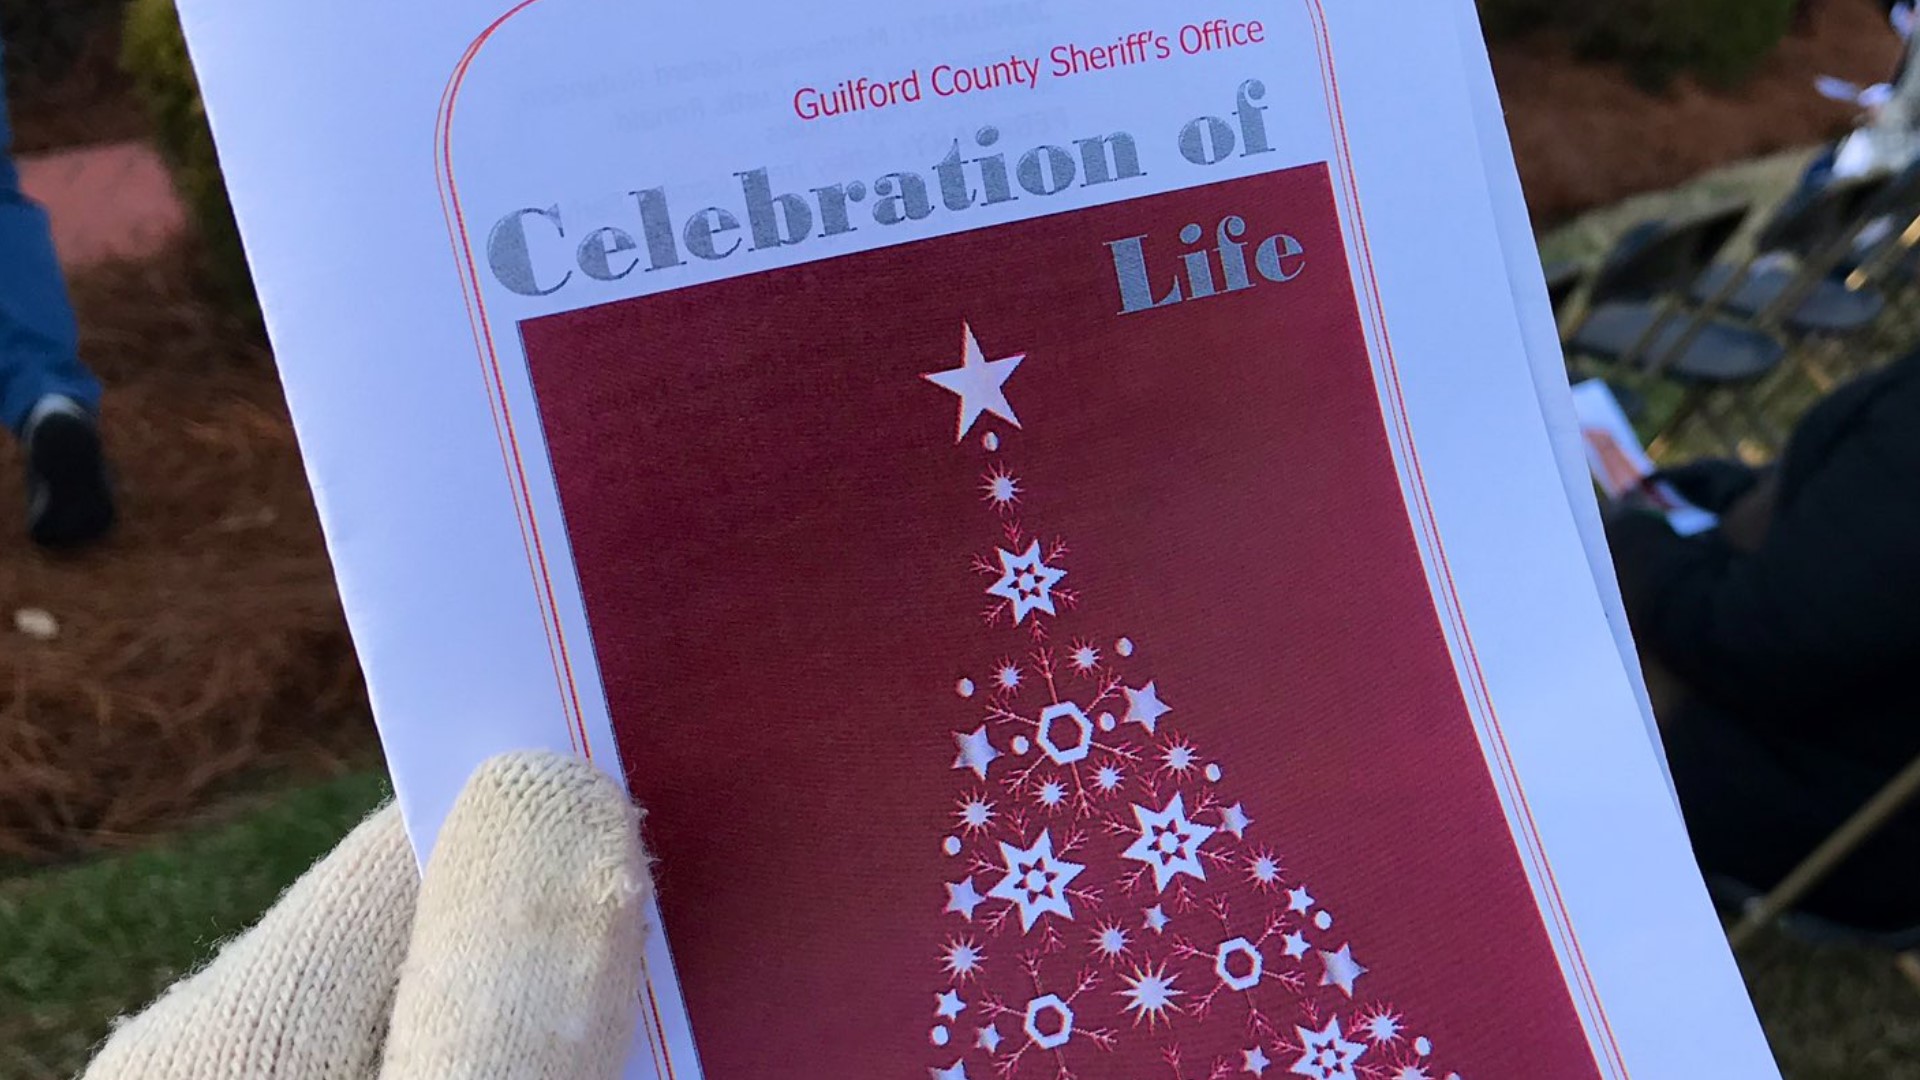 Guilford County Sheriff hosts annual Tree Lighting Ceremony